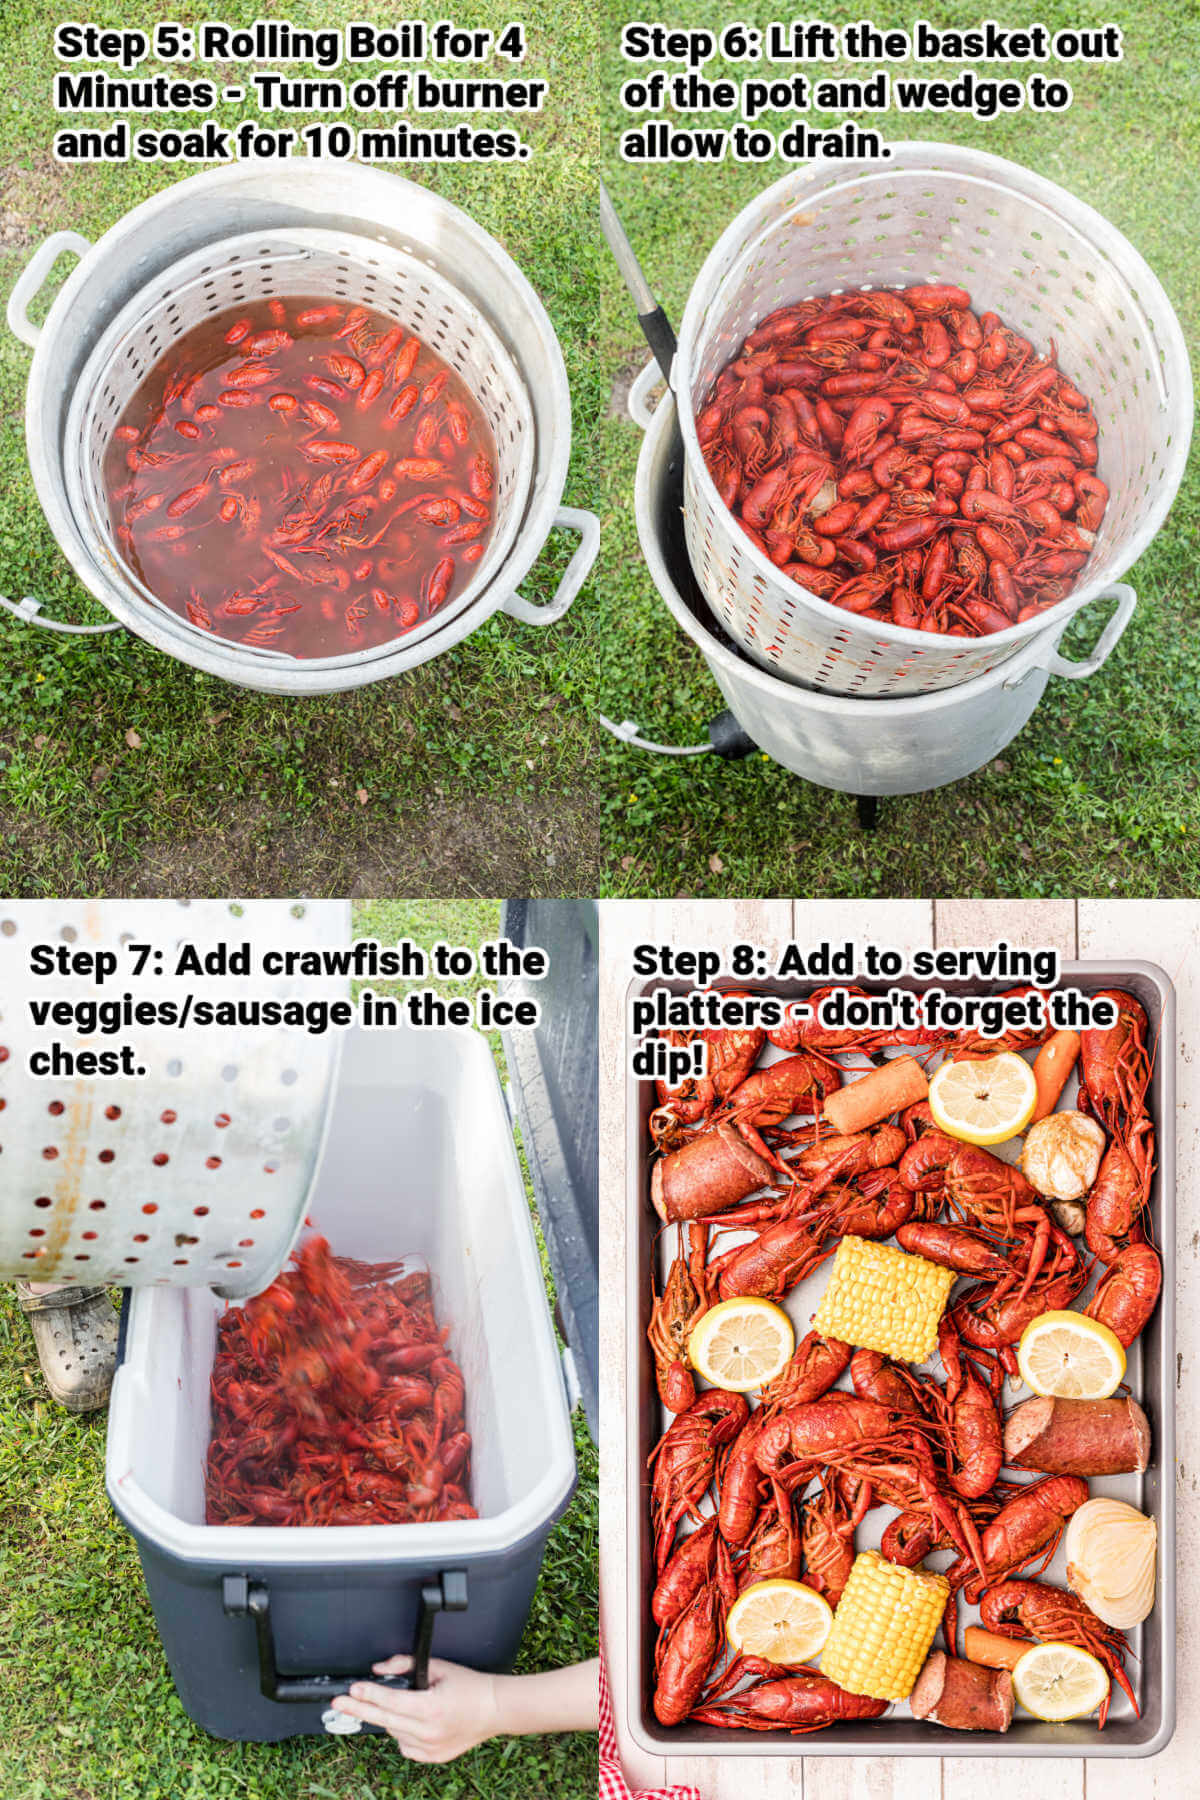 how to boil crawfish steps 5 through 8 - images